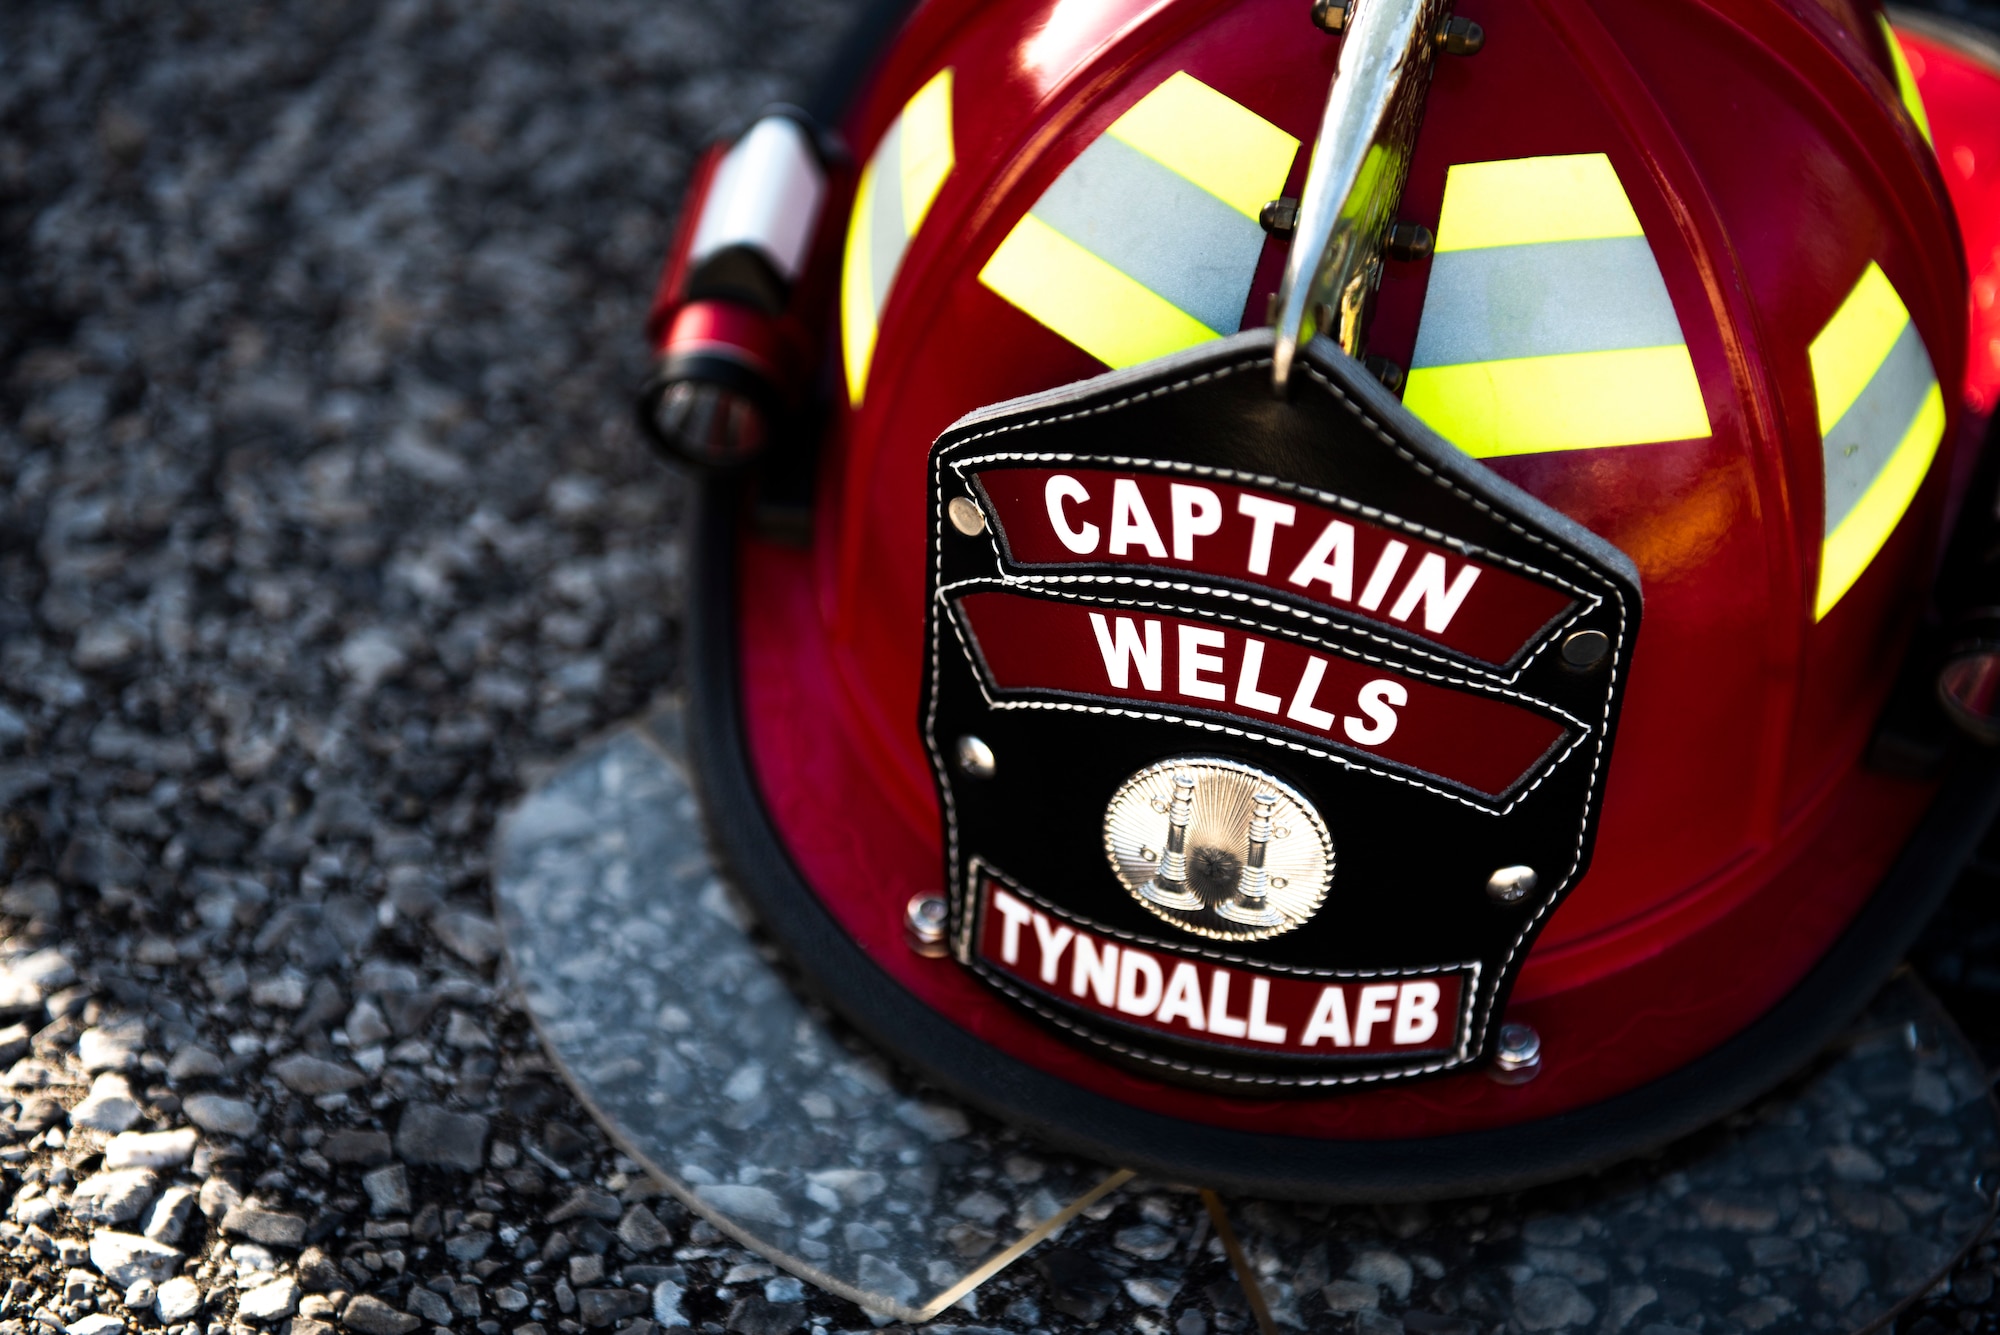 The helmet of Staff Sgt. Jeffery Wells, 325th Civil Engineer Squadron fire department member is pictured at Tyndall Air Force Base, Florida, March 12, 2020. The base participated in a joint exercise which included serval units from Tyndall and local emergency responders. The collaboration served to strengthen community relations and proper patient care during a medical emergency on base. (U.S. Air Force photo by Staff Sgt. Magen M. Reeves)